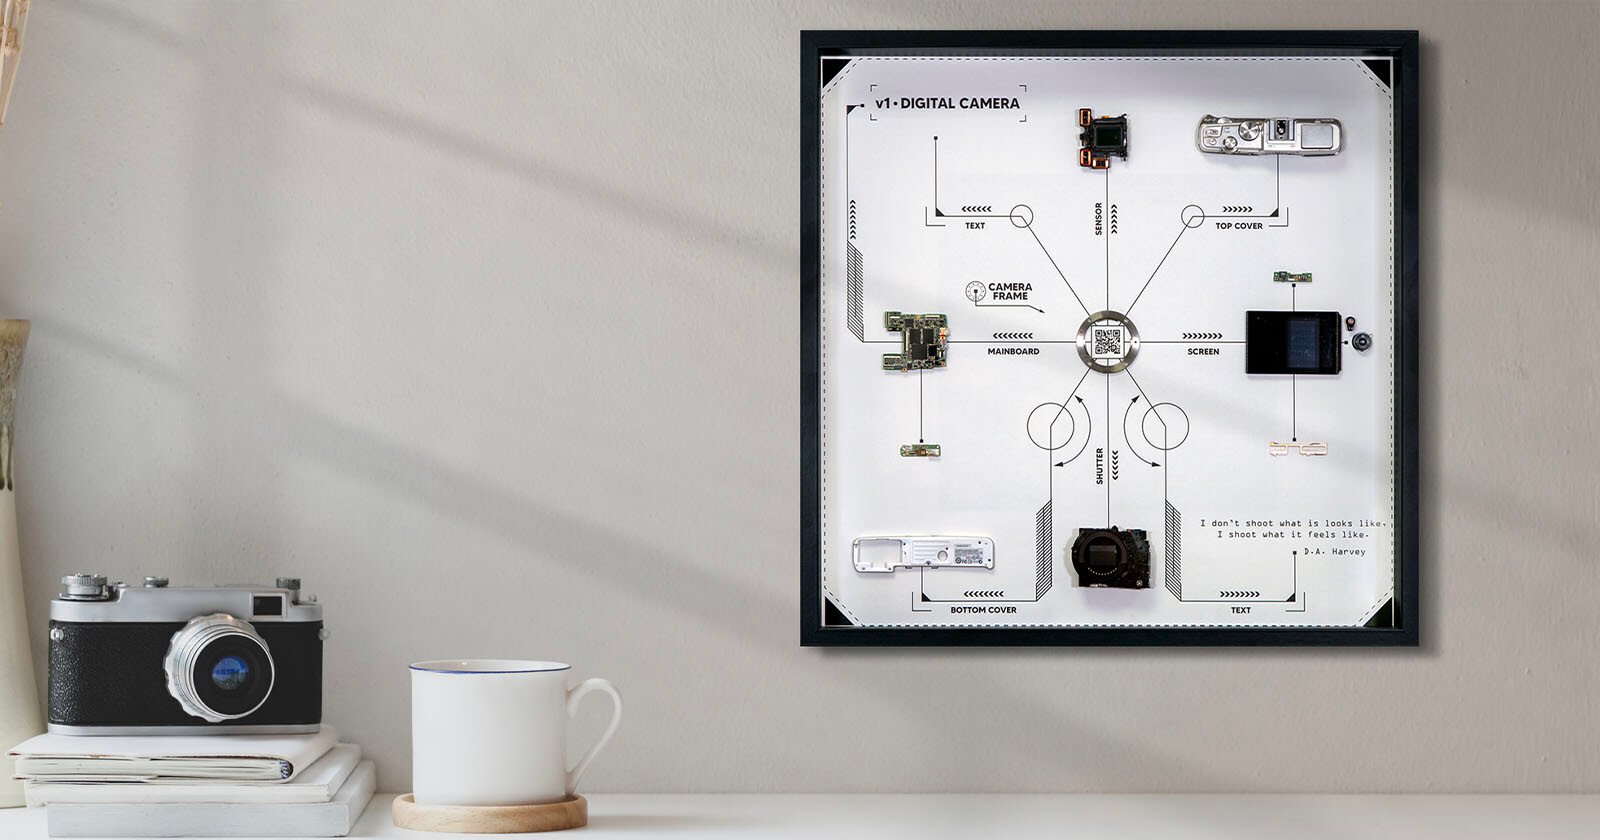 The CameraFrame is Hand-Made Wall Art Built from Real Camera Parts